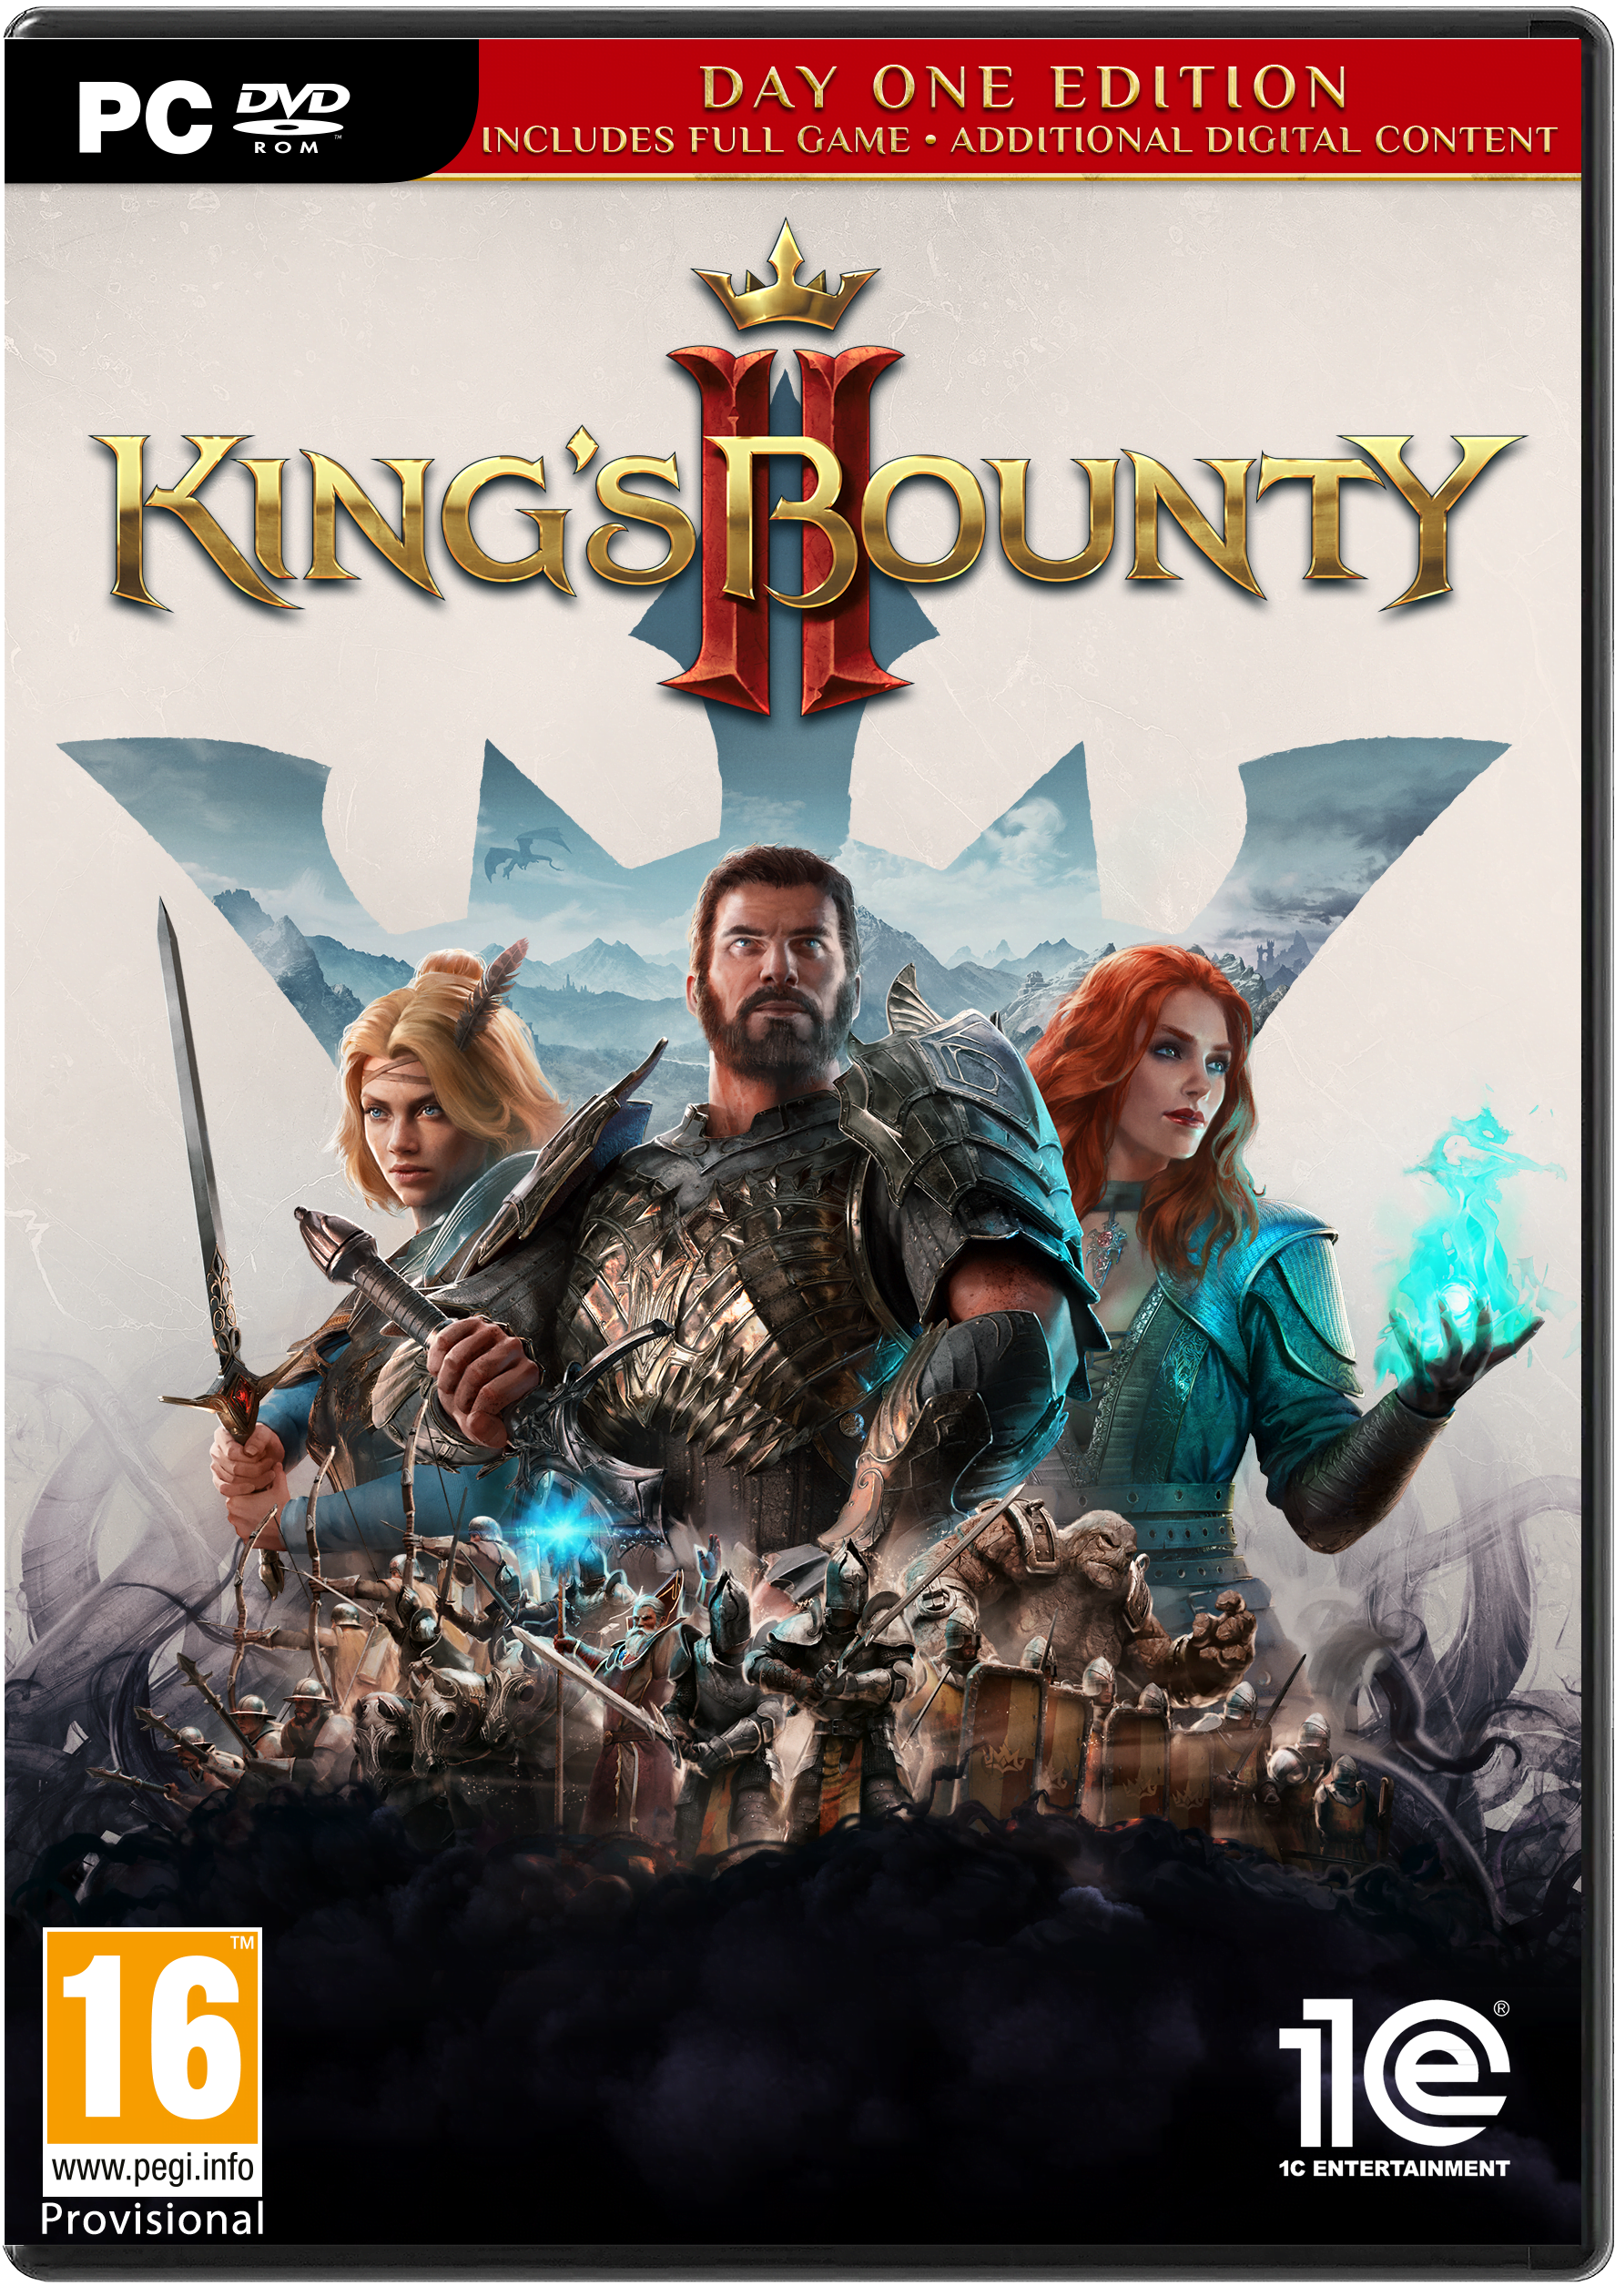 King's Bounty II - Day One Edition (PC)